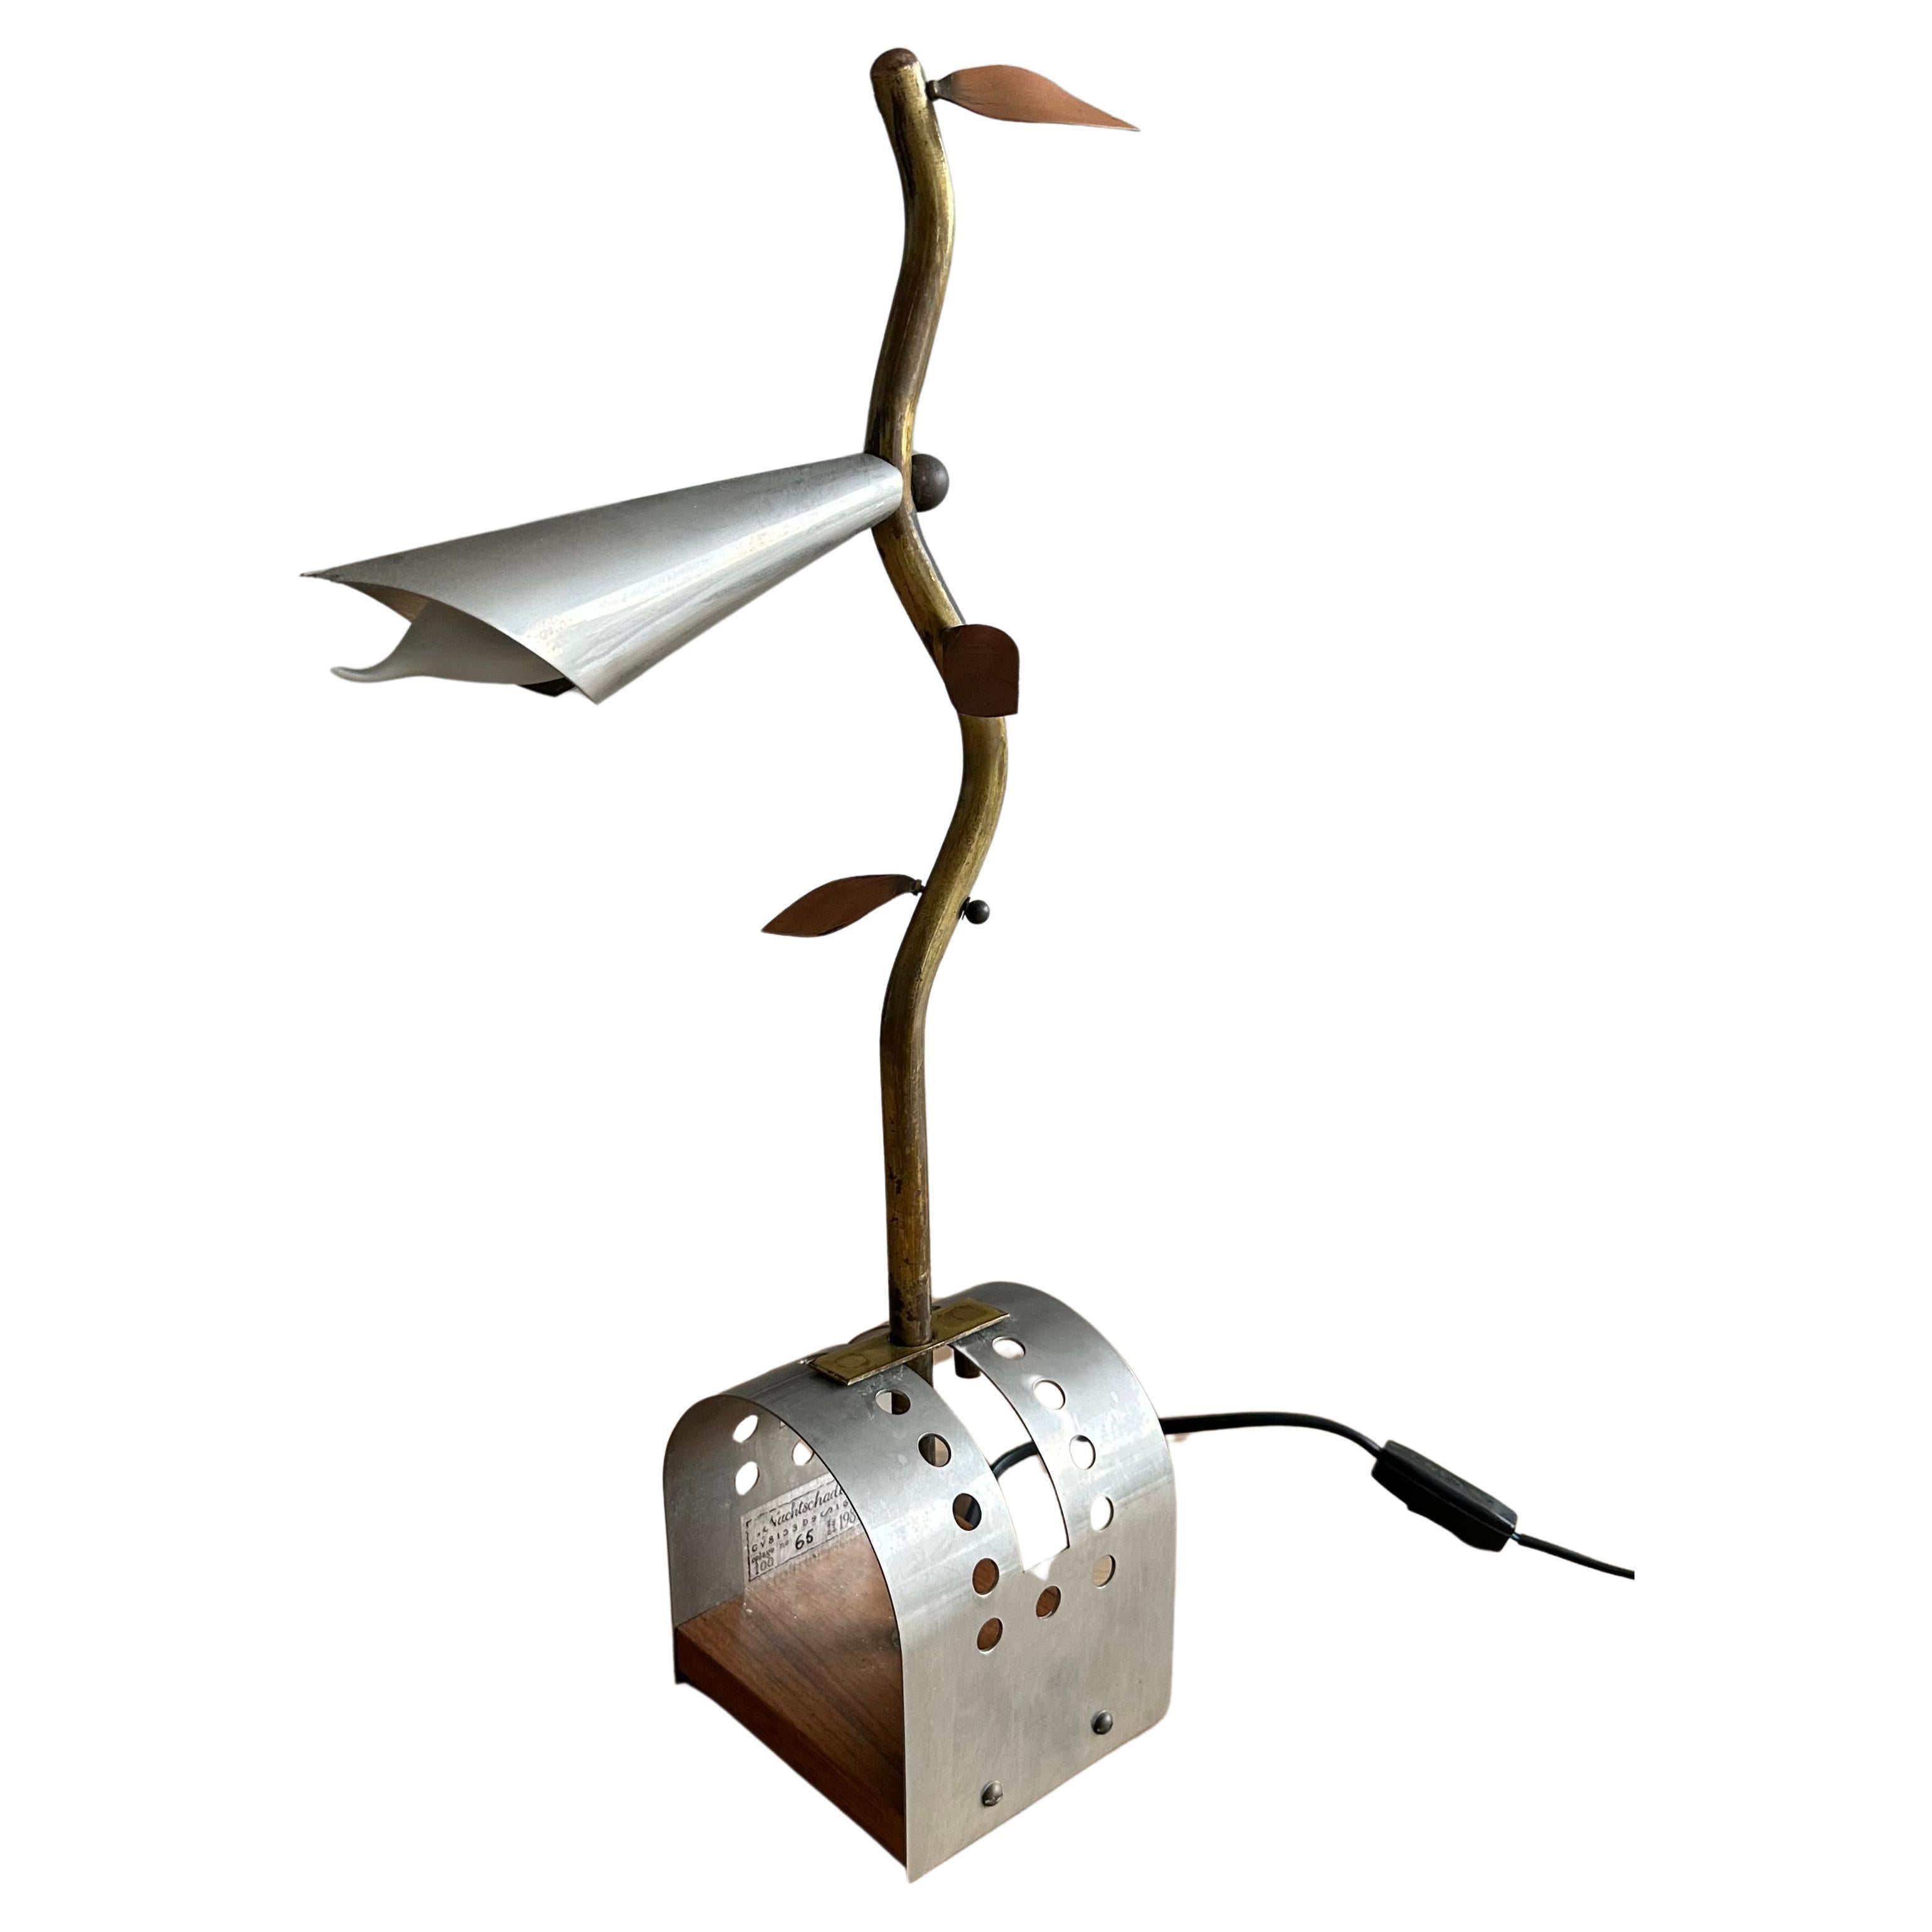 Cubic3 Dutch Design Table or Desk Lamp "Nachtschade", Nightshade Plants Inspired For Sale